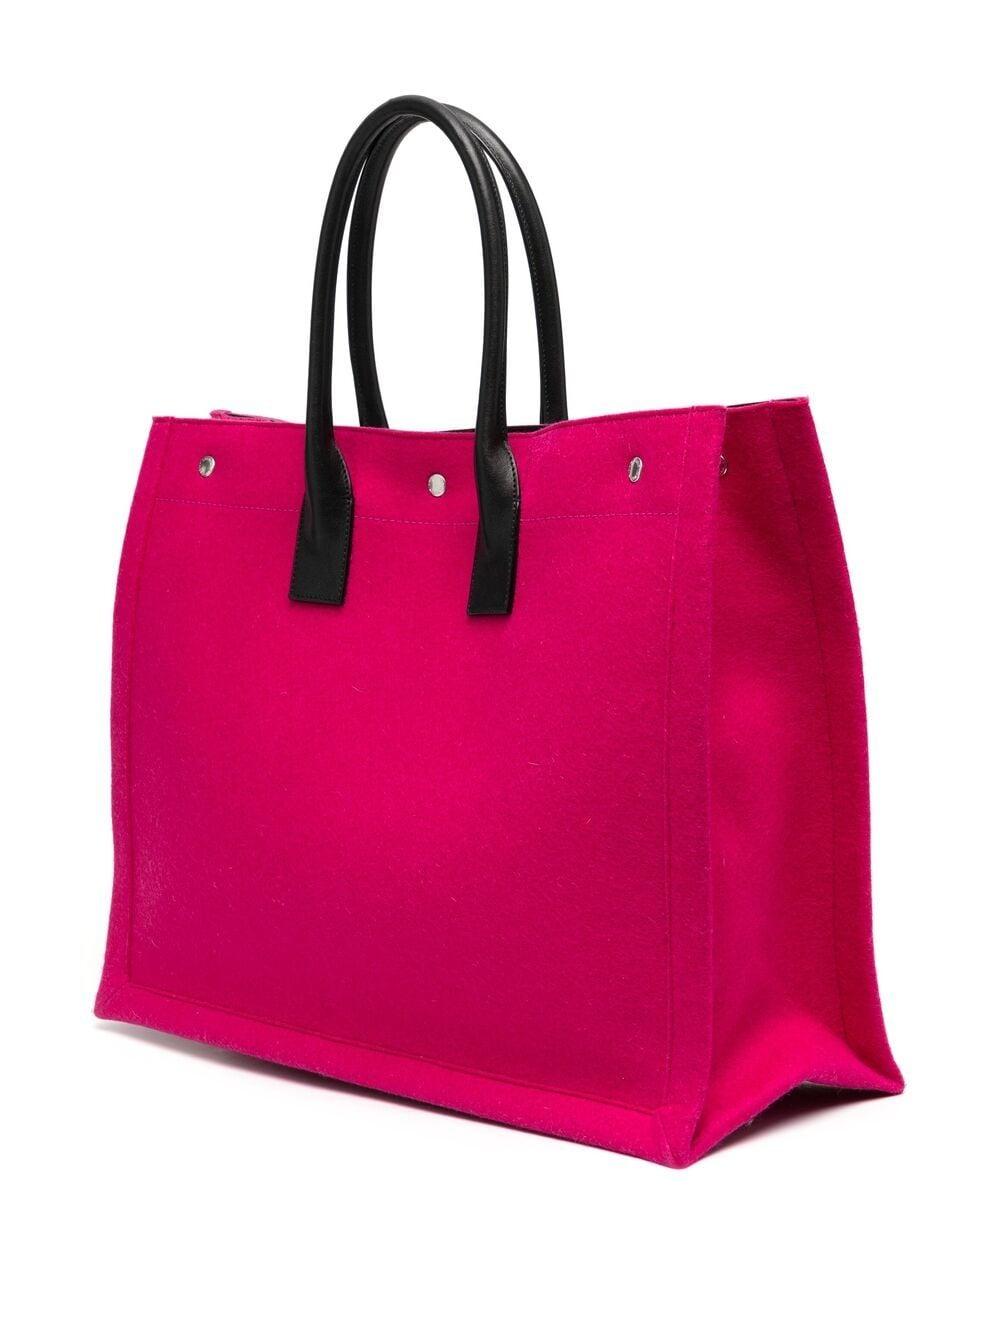 Vintage Yves Saint Laurent Fuchsia Pink Vorice Tote Bag, with